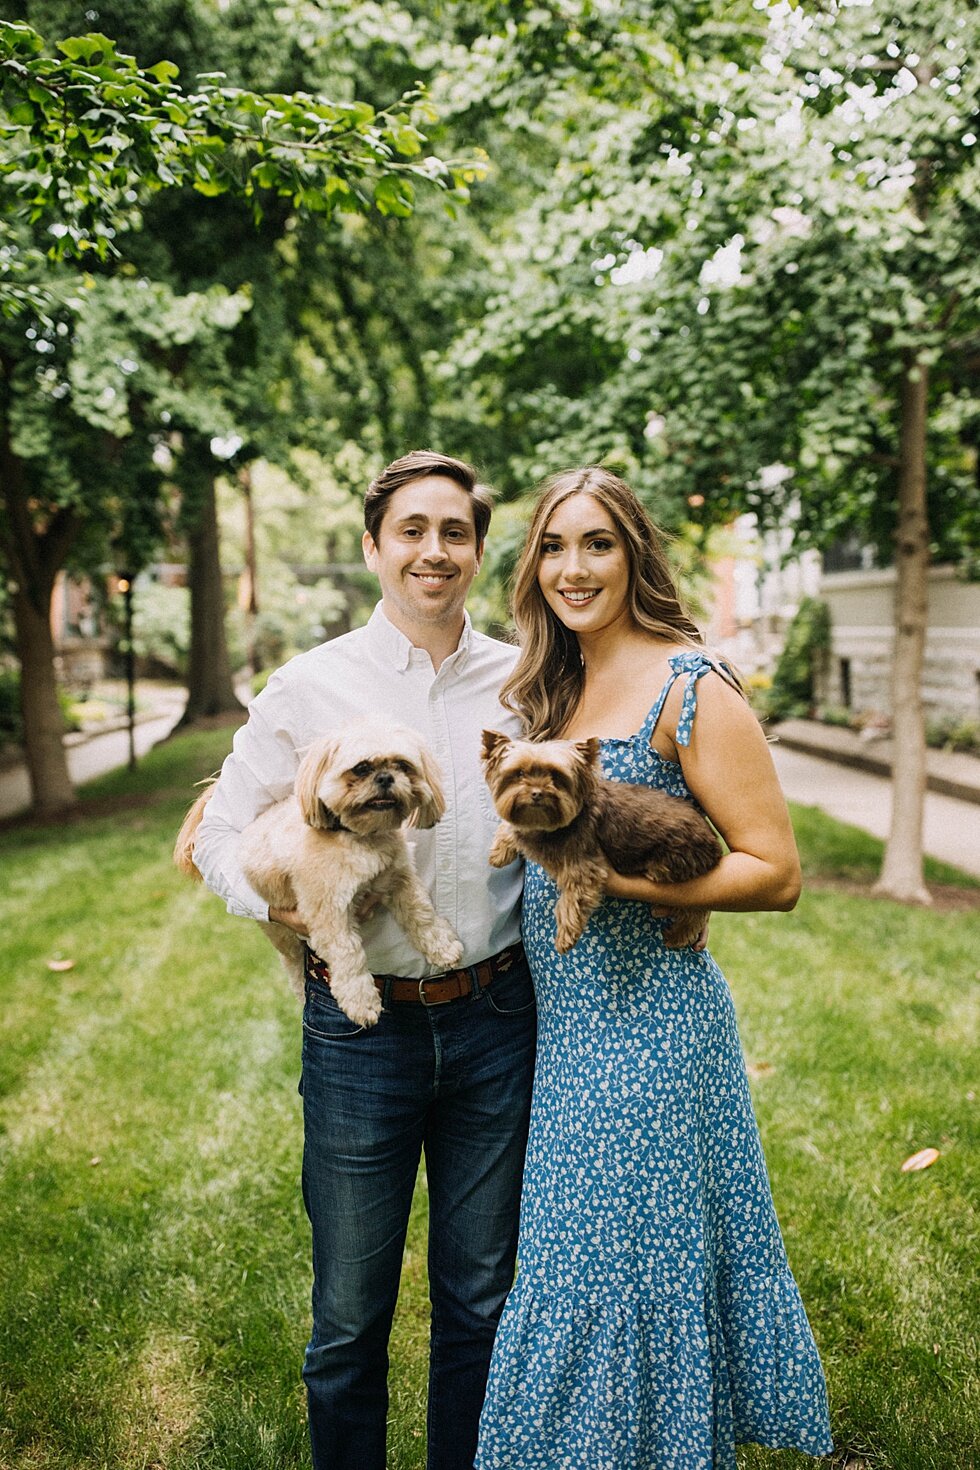  Nothing like sharing your engagement session with your family, especially when your family happens to be three adorable puppies! engagement gardens lush green romantic urban engagements #engagementphotos #savethedatephotos #savethedates #engagementp